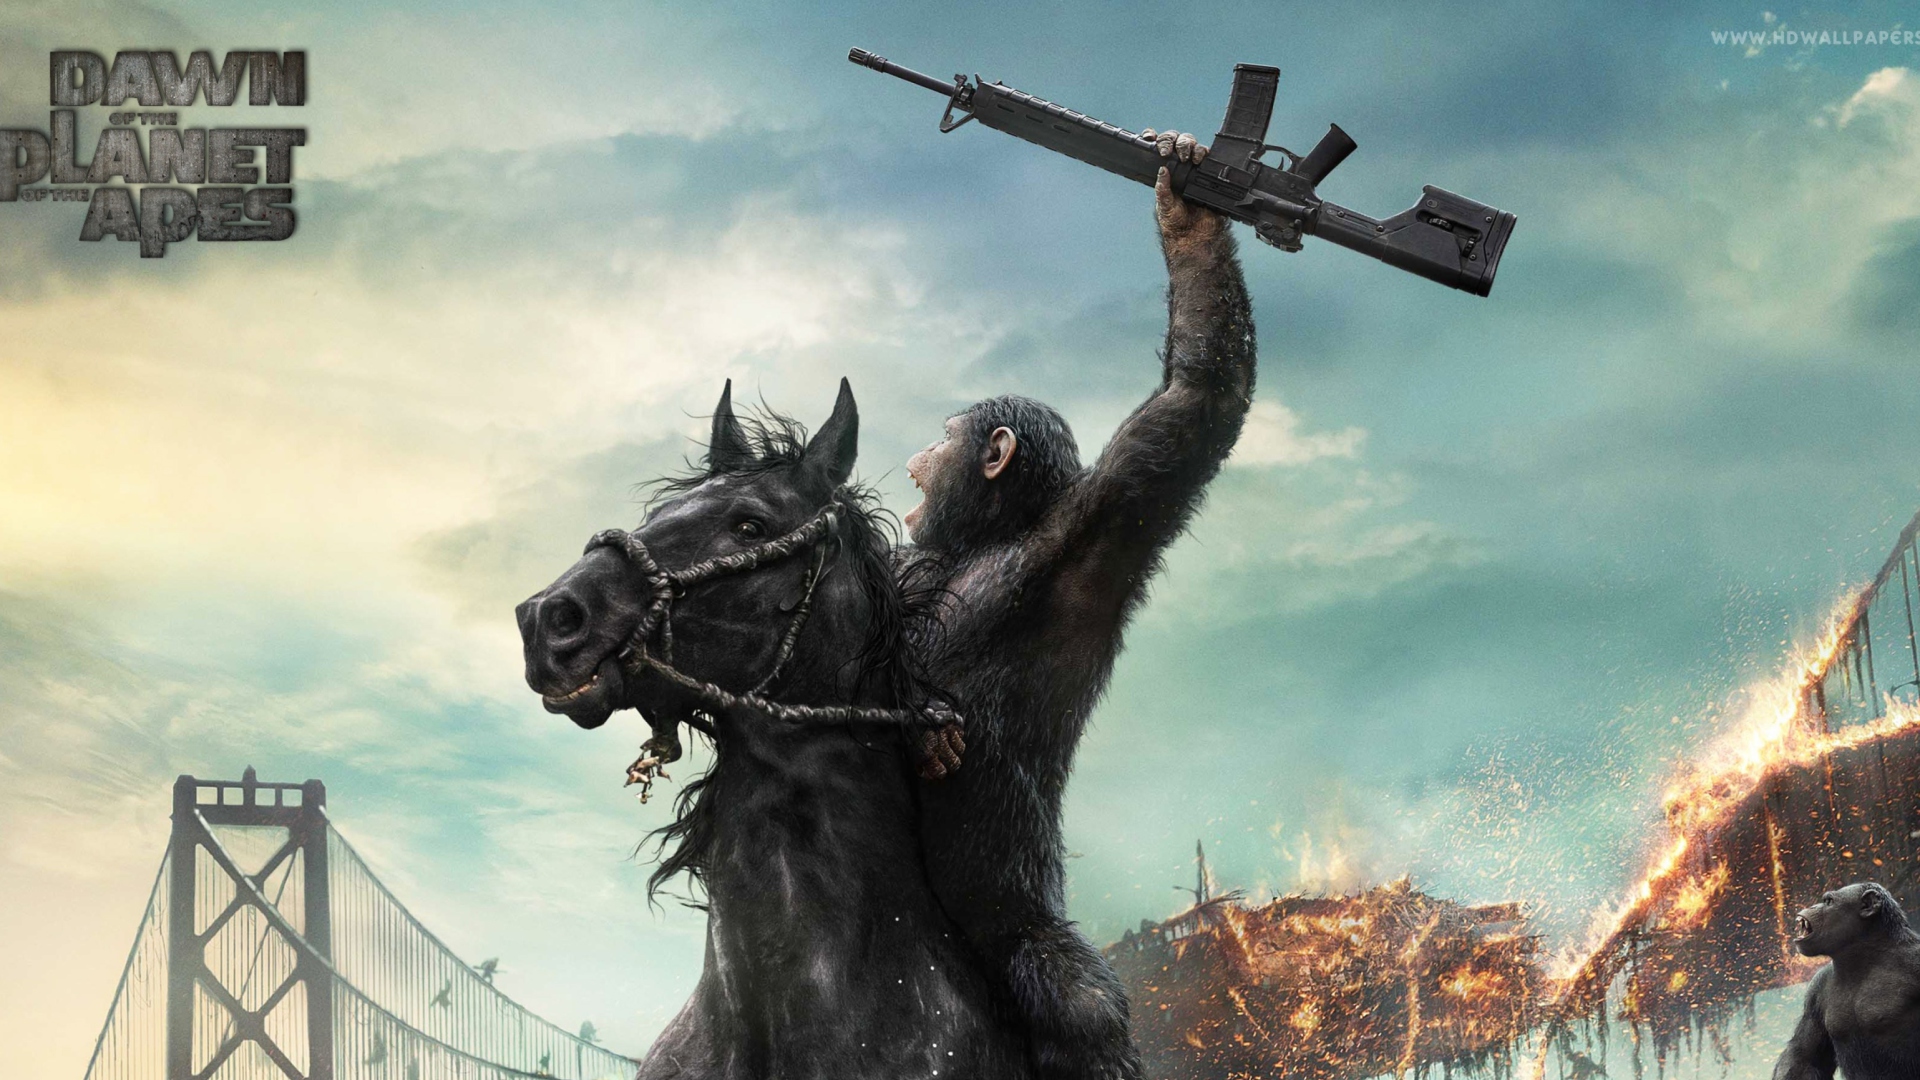 Dawn Of The Planet Of The Apes Movie screenshot #1 1920x1080